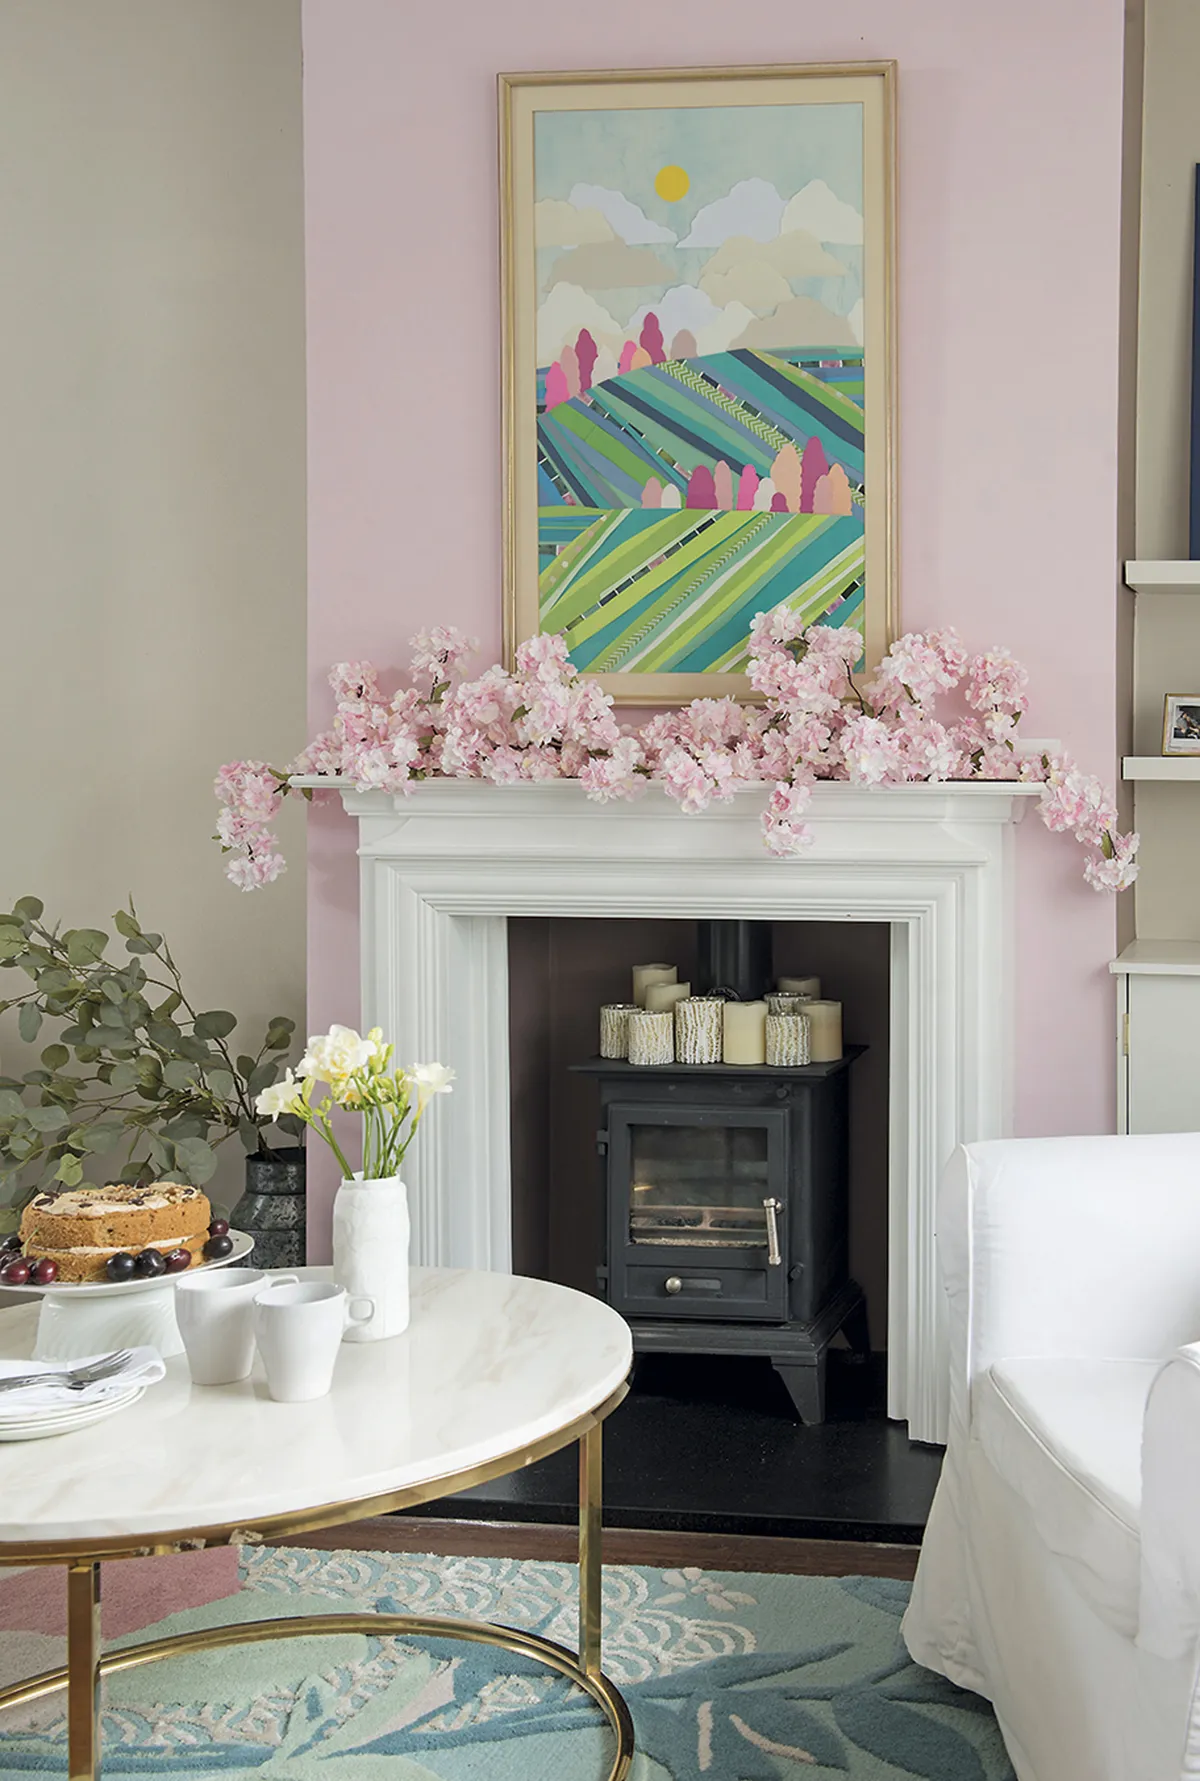 'My pastel living room is full of character'